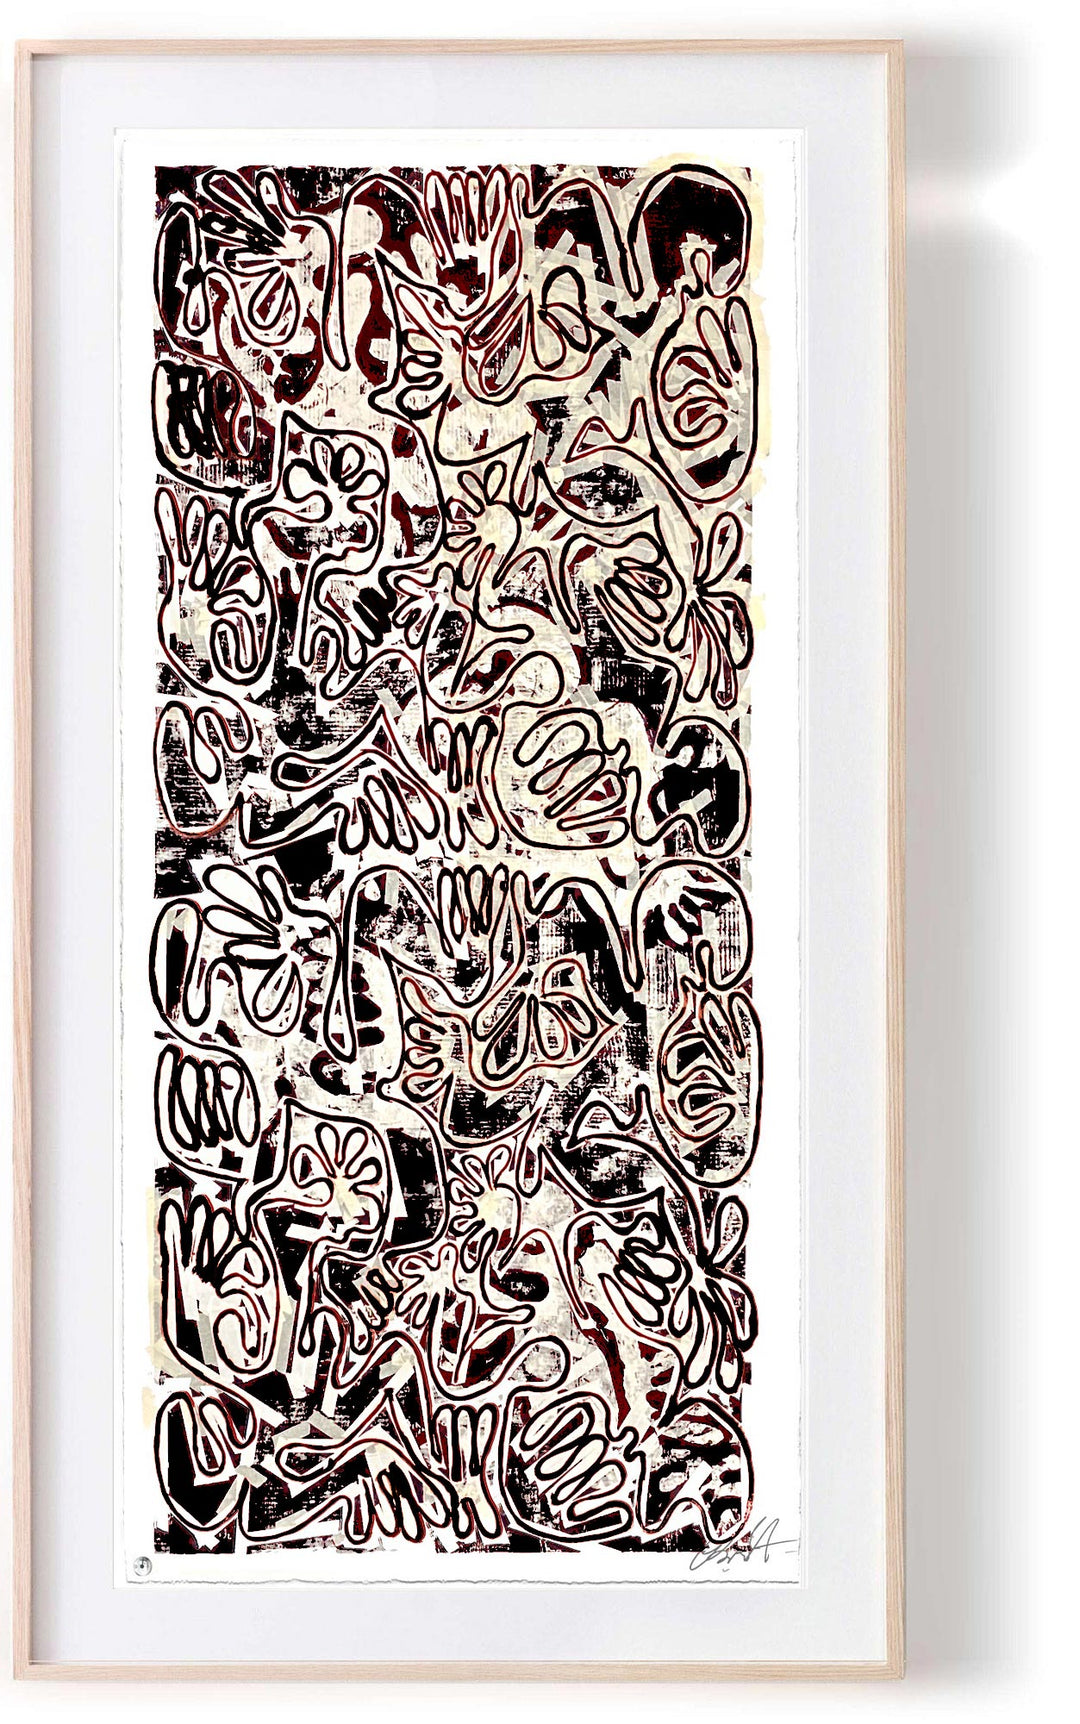 "Covid Chaos Eggplant (40 x 100in)" by Robert Santore ©2022. Framed, Hand painted artist silkscreen print, hand printed on the finest archival cold press cotton rag paper with hand torn edges. Painted in the Manhattan studio.